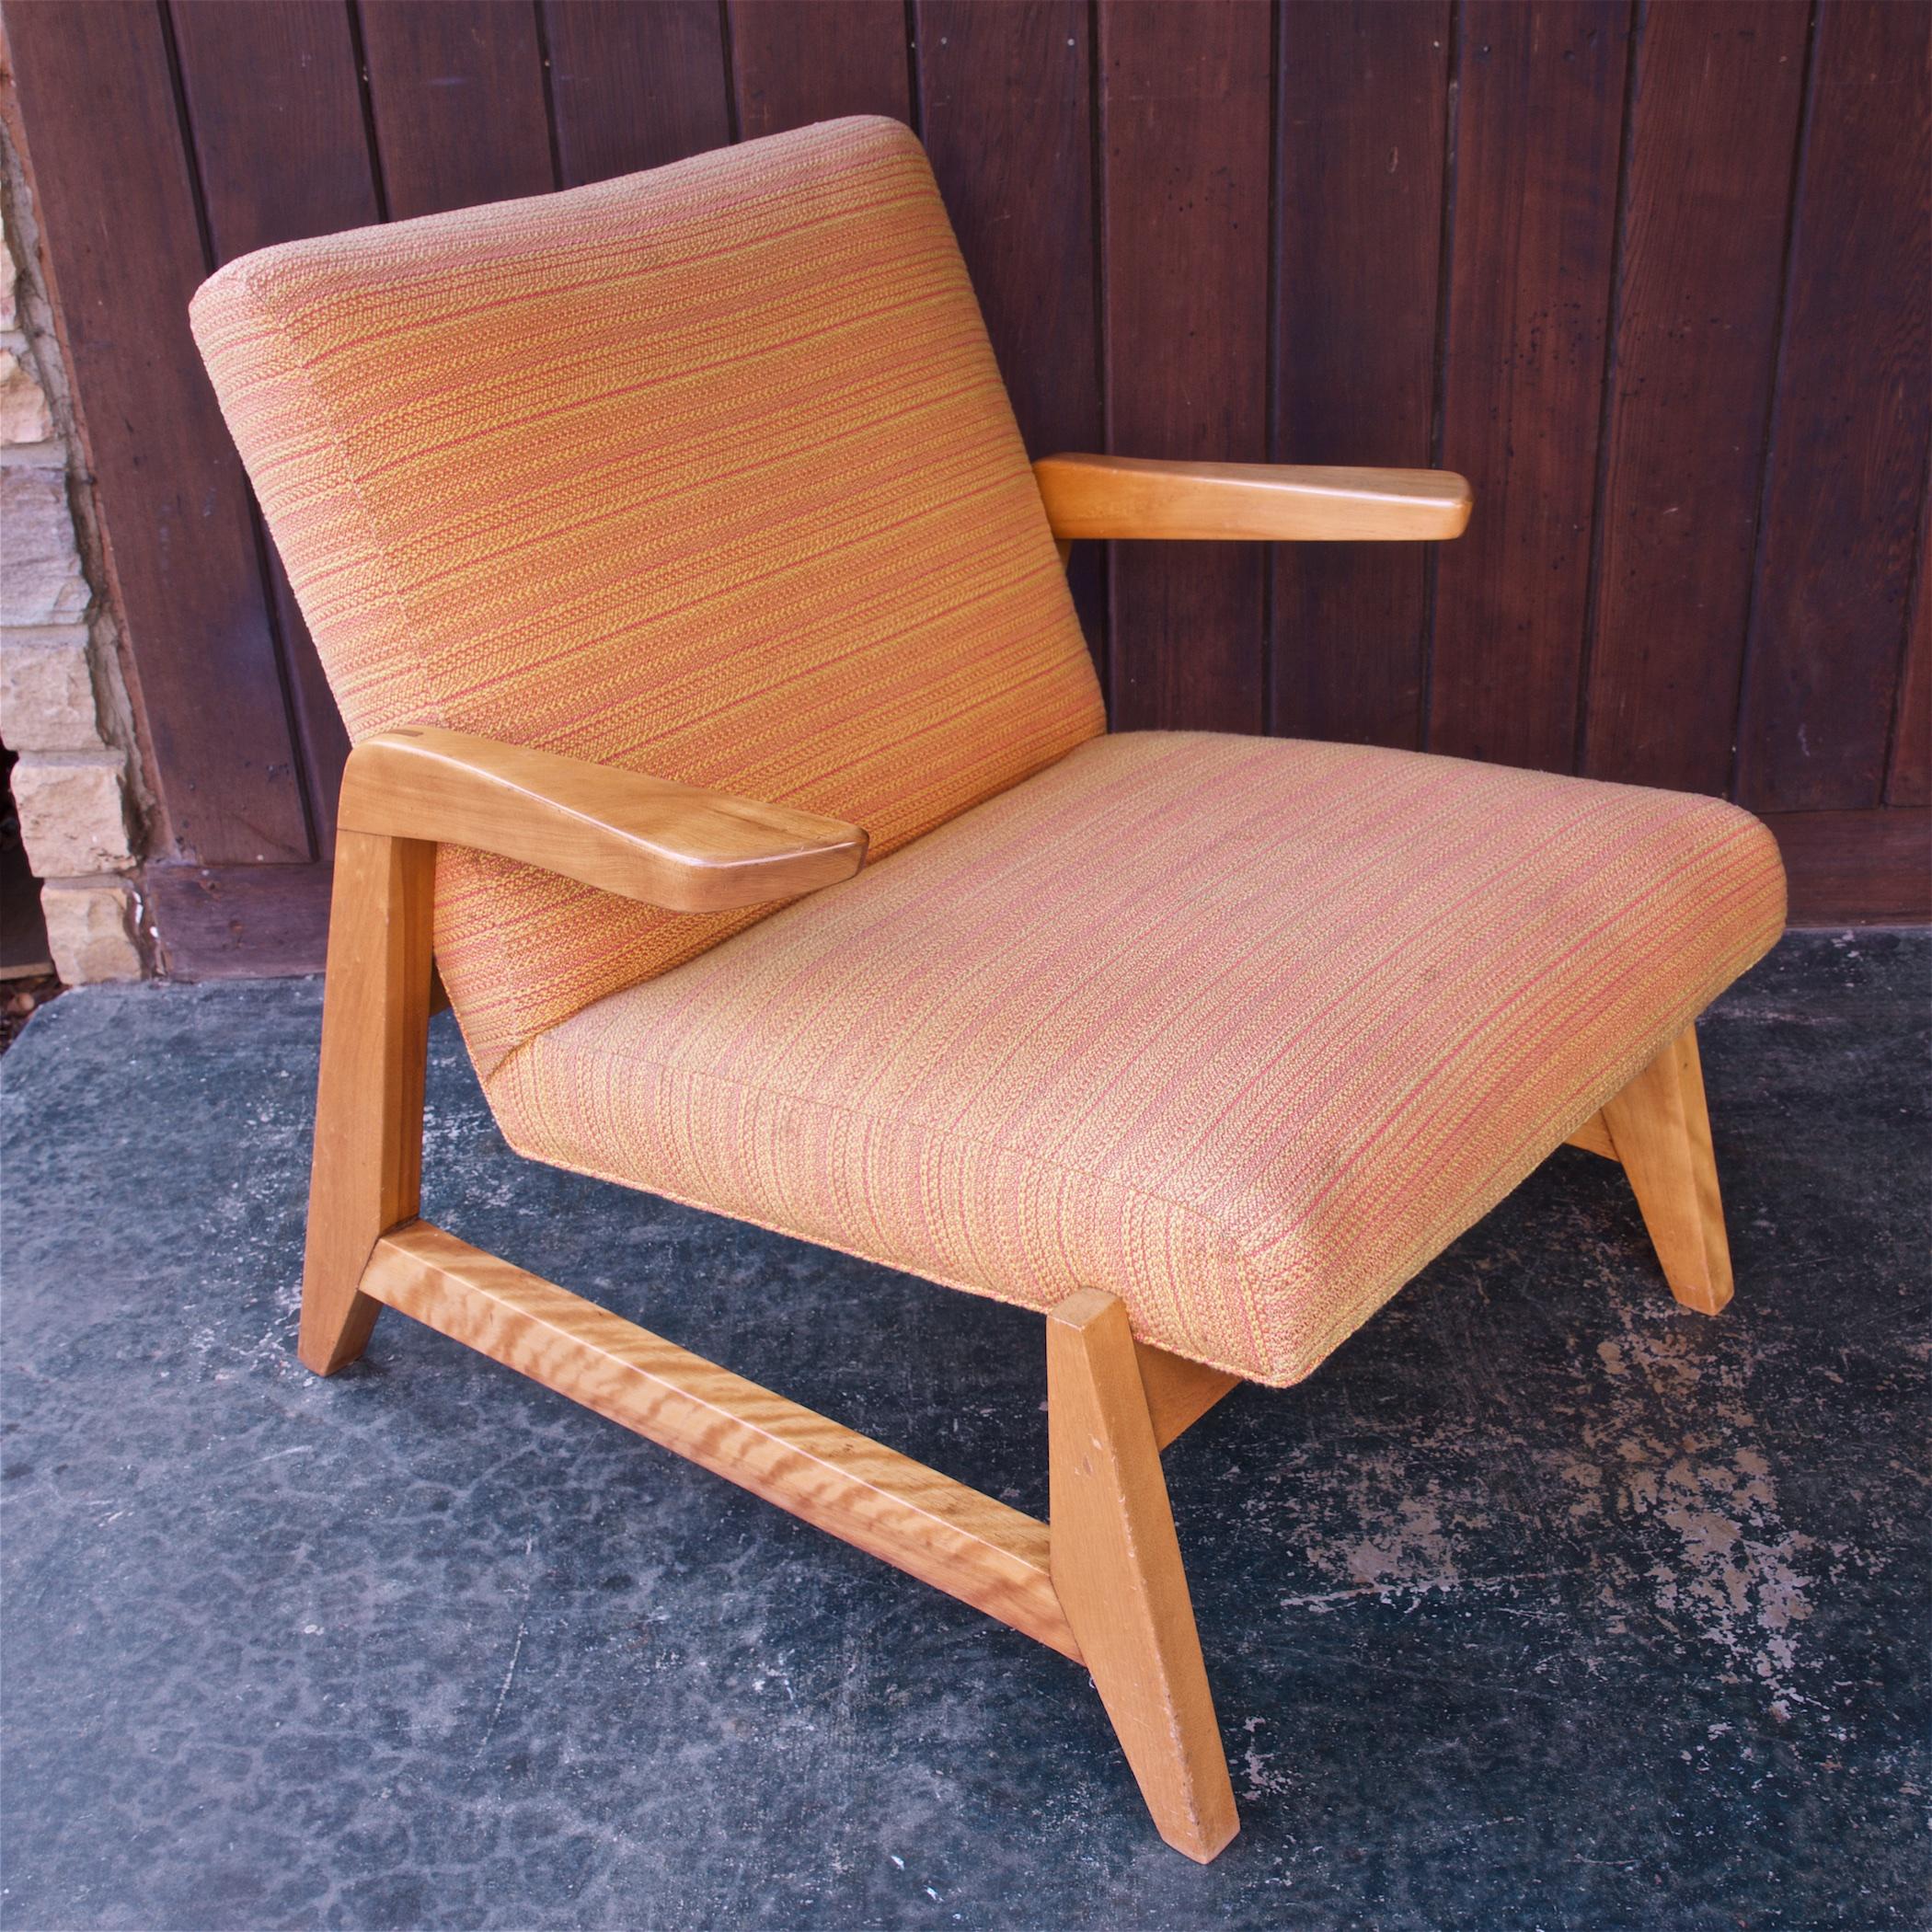 Birch Pair Mid-Century Greenbelt Lounge Chairs by Ralph Rapson for Knoll 1940s Modern For Sale